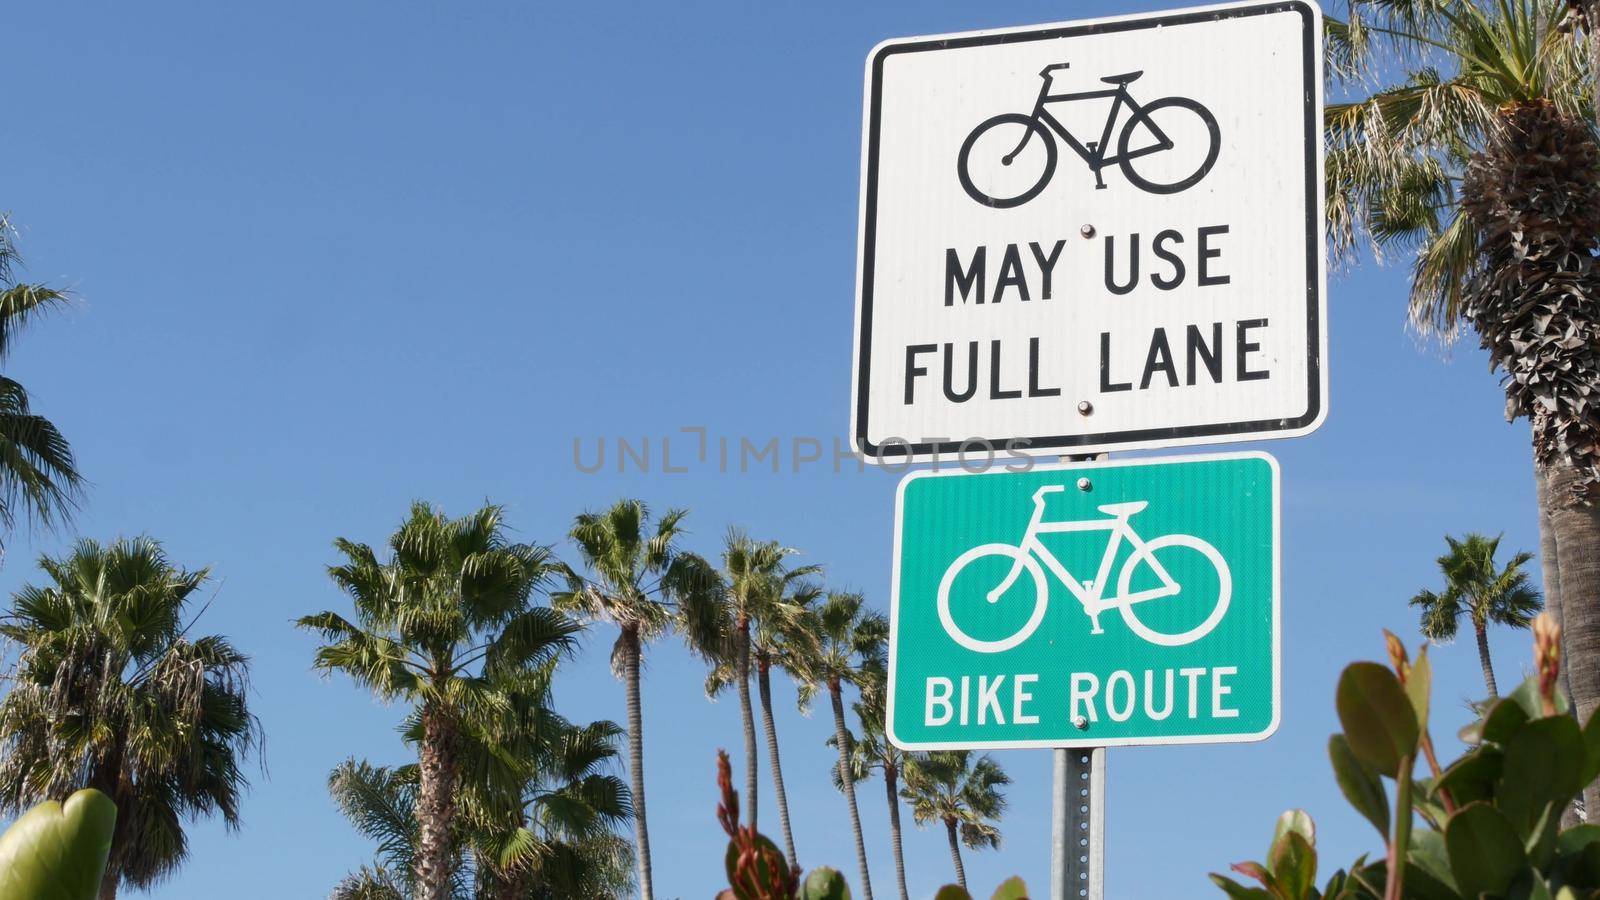 Bike Route green road sign in California, USA. Bicycle lane singpost. Bikeway in Oceanside pacific tourist resort. Cycleway signboard and palm. Healthy lifestyle, recreation and safety cycling symbol by DogoraSun